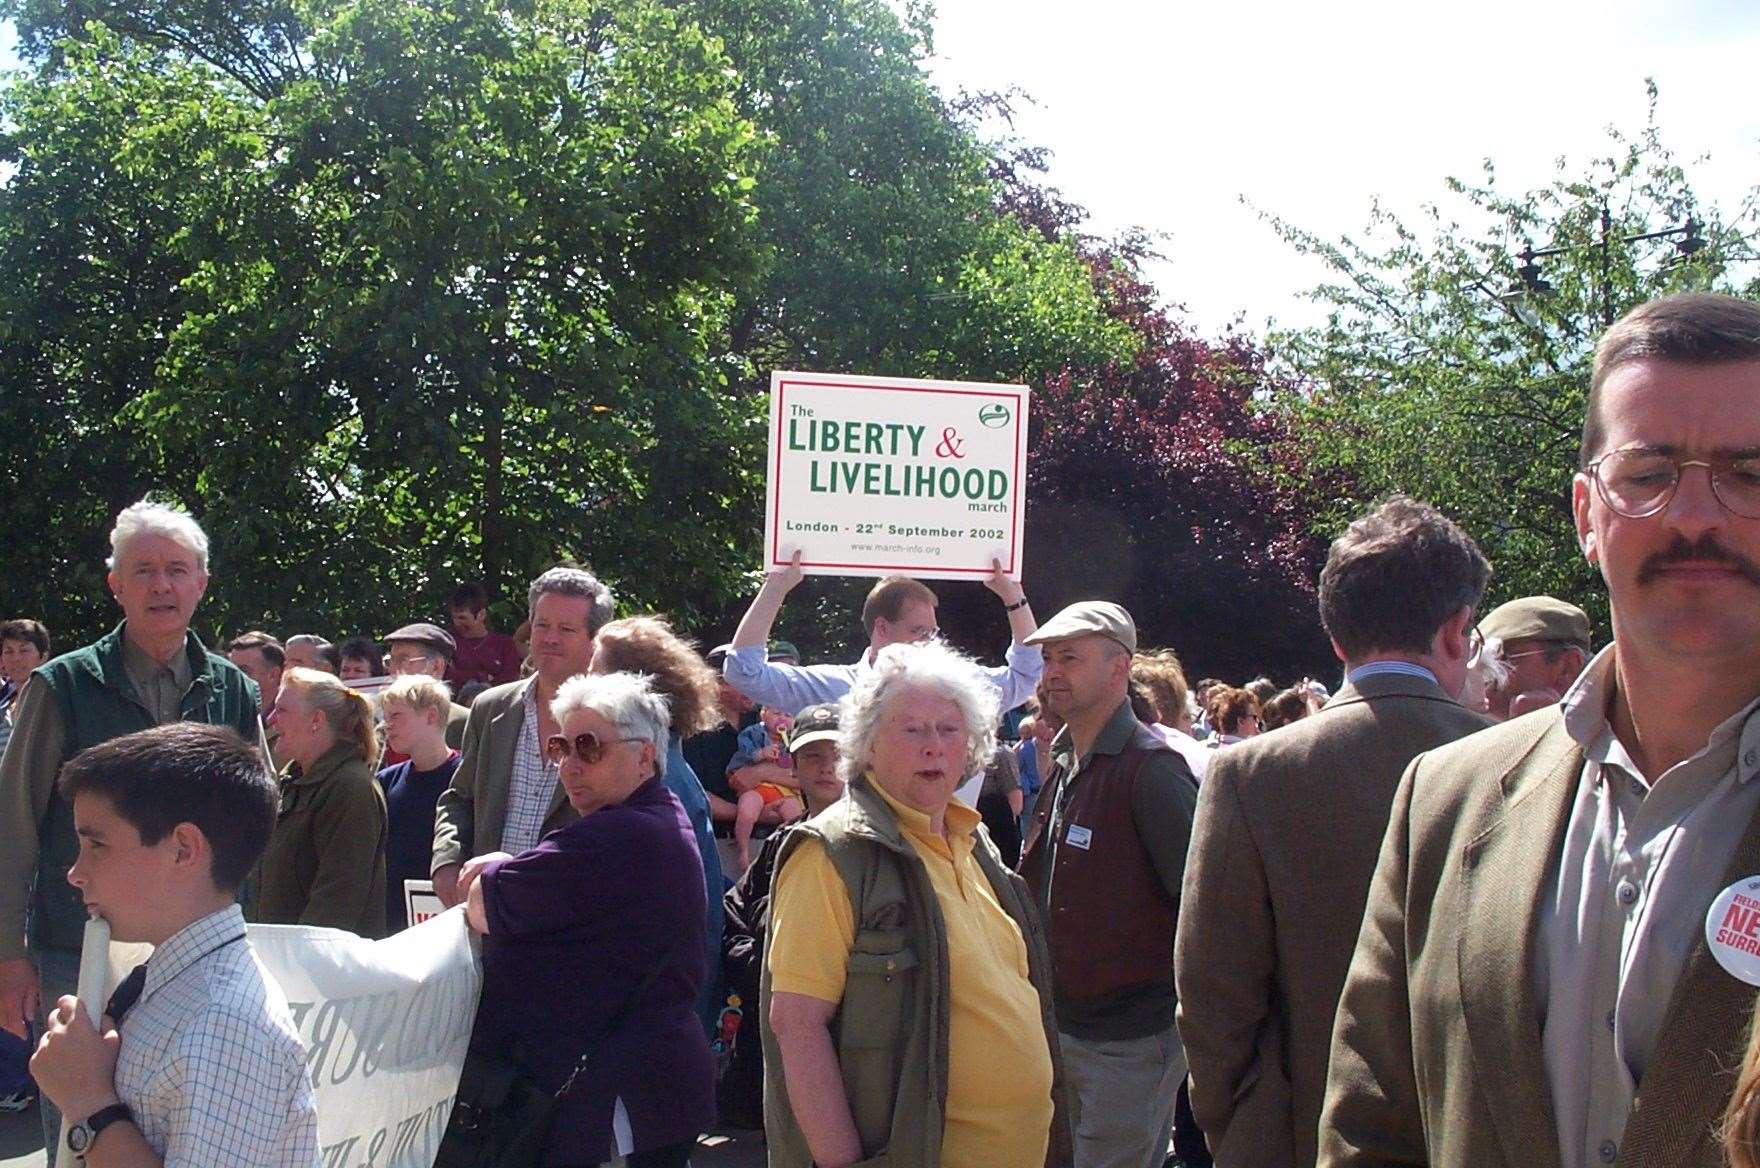 Demonstrators show their support for hunting at the Countryside Alliance's rally in Maidstone in 2002.